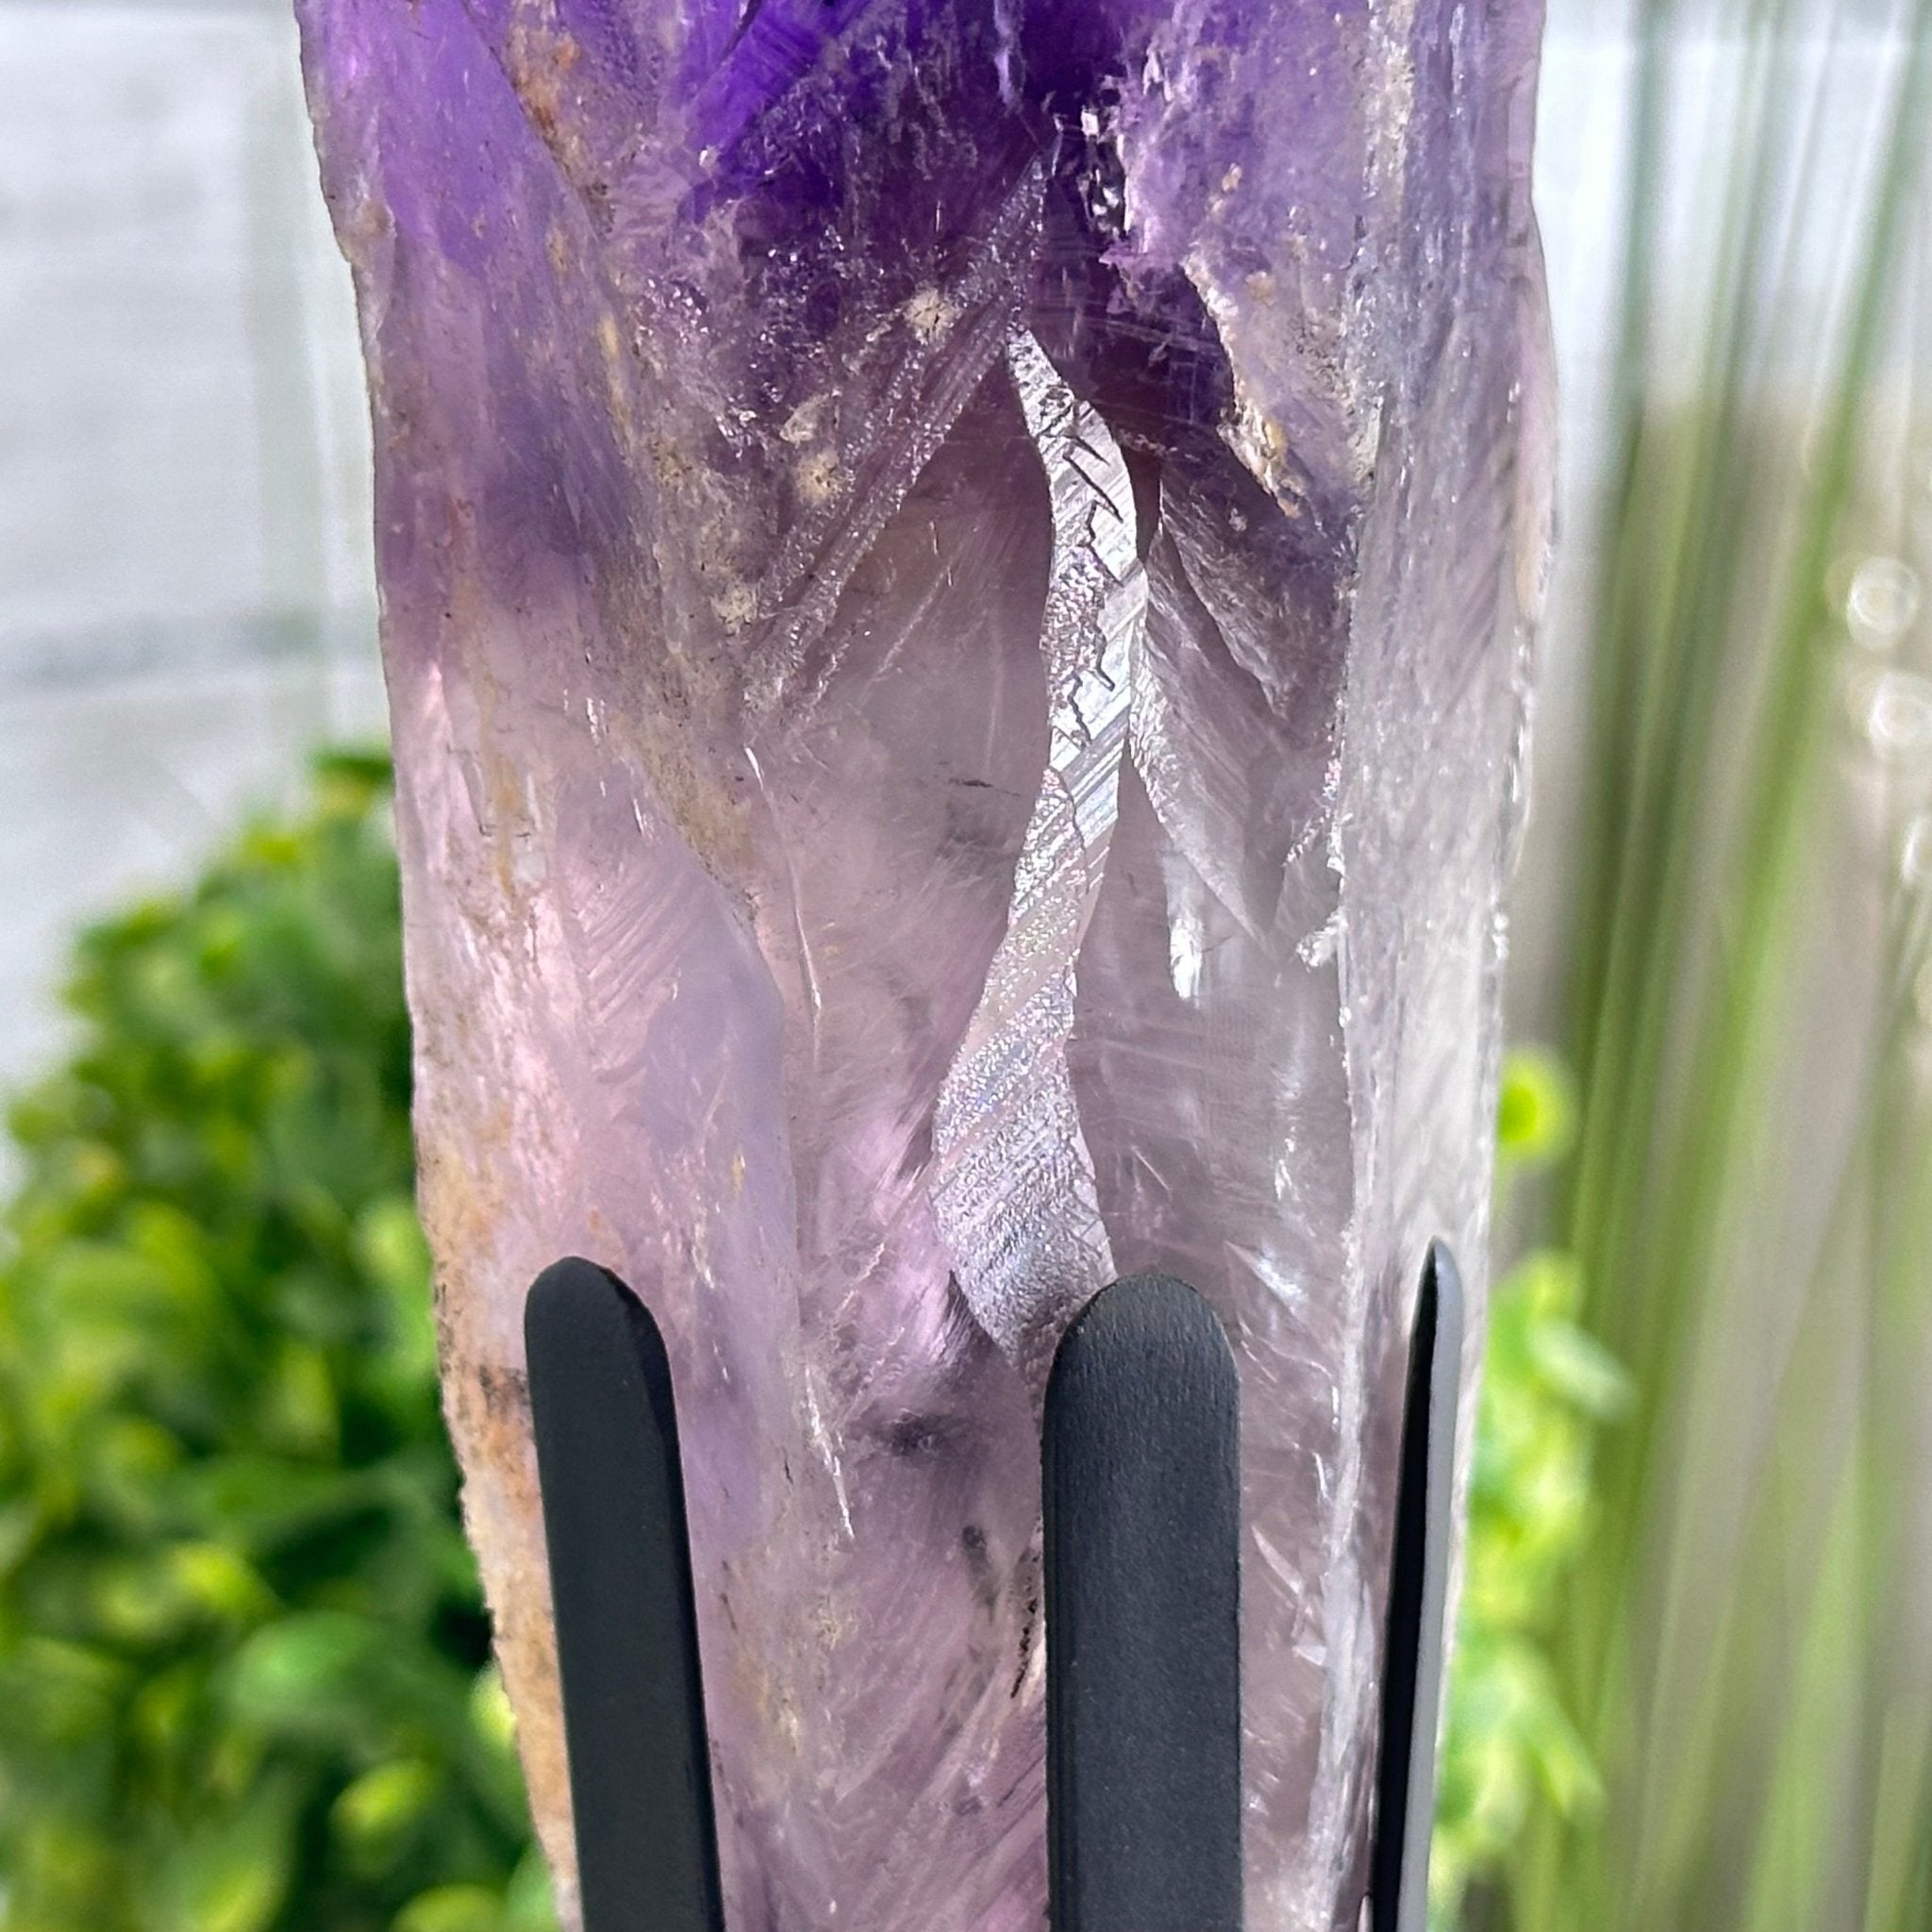 Super Quality Amethyst Wand on a Metal Stand, 1.5 lbs & 9.6" Tall #3123AM-001 - Brazil GemsBrazil GemsSuper Quality Amethyst Wand on a Metal Stand, 1.5 lbs & 9.6" Tall #3123AM-001Clusters on Fixed Bases3123AM-001